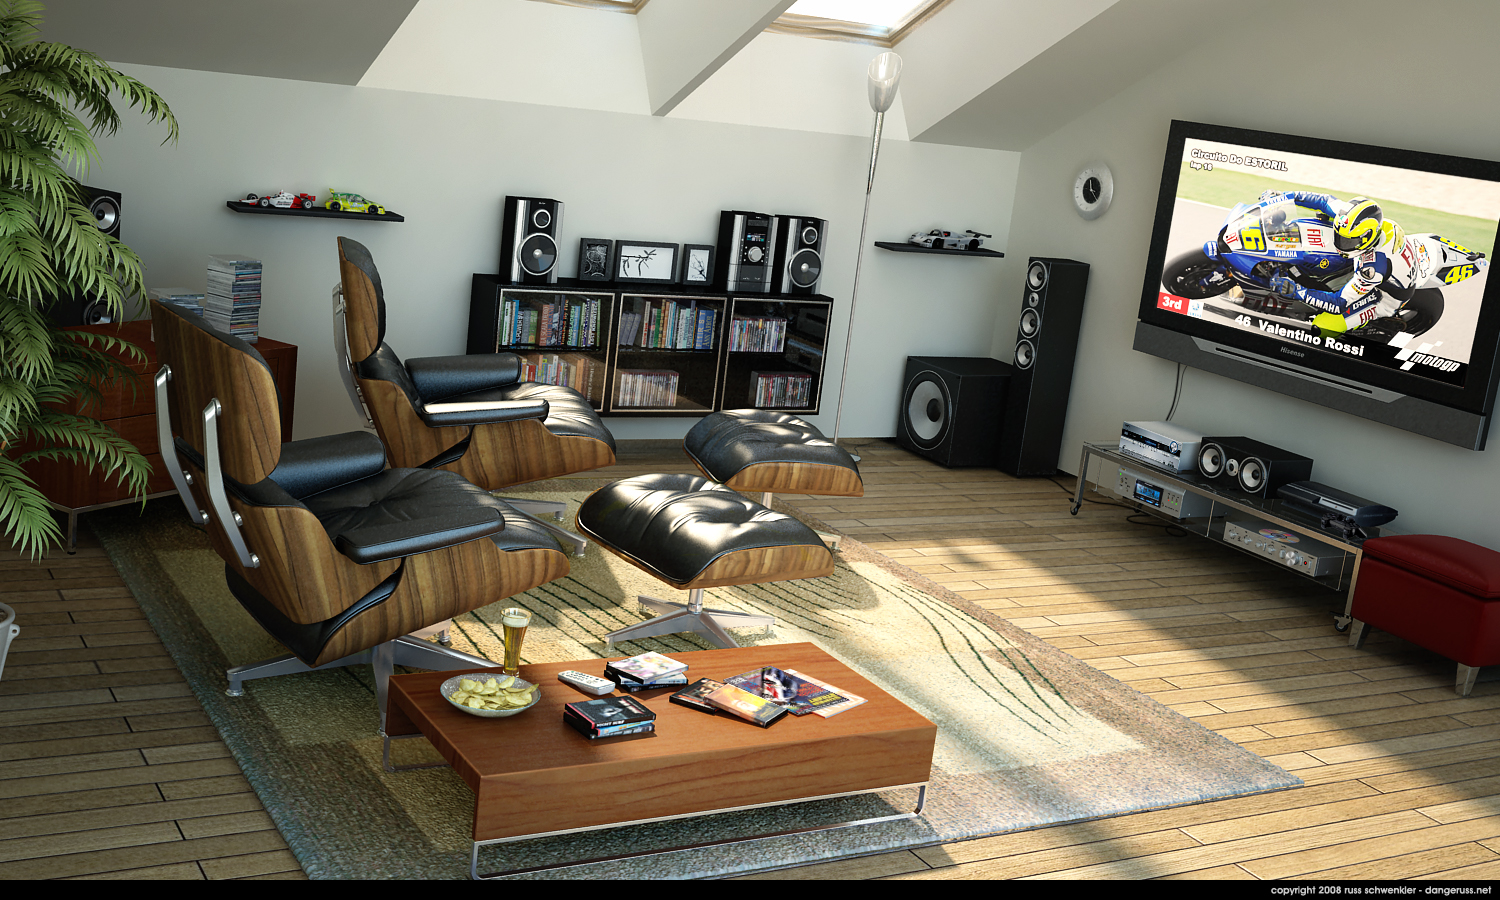 man made, room, chair, coffee table, speakers, television wallpaper for mobile